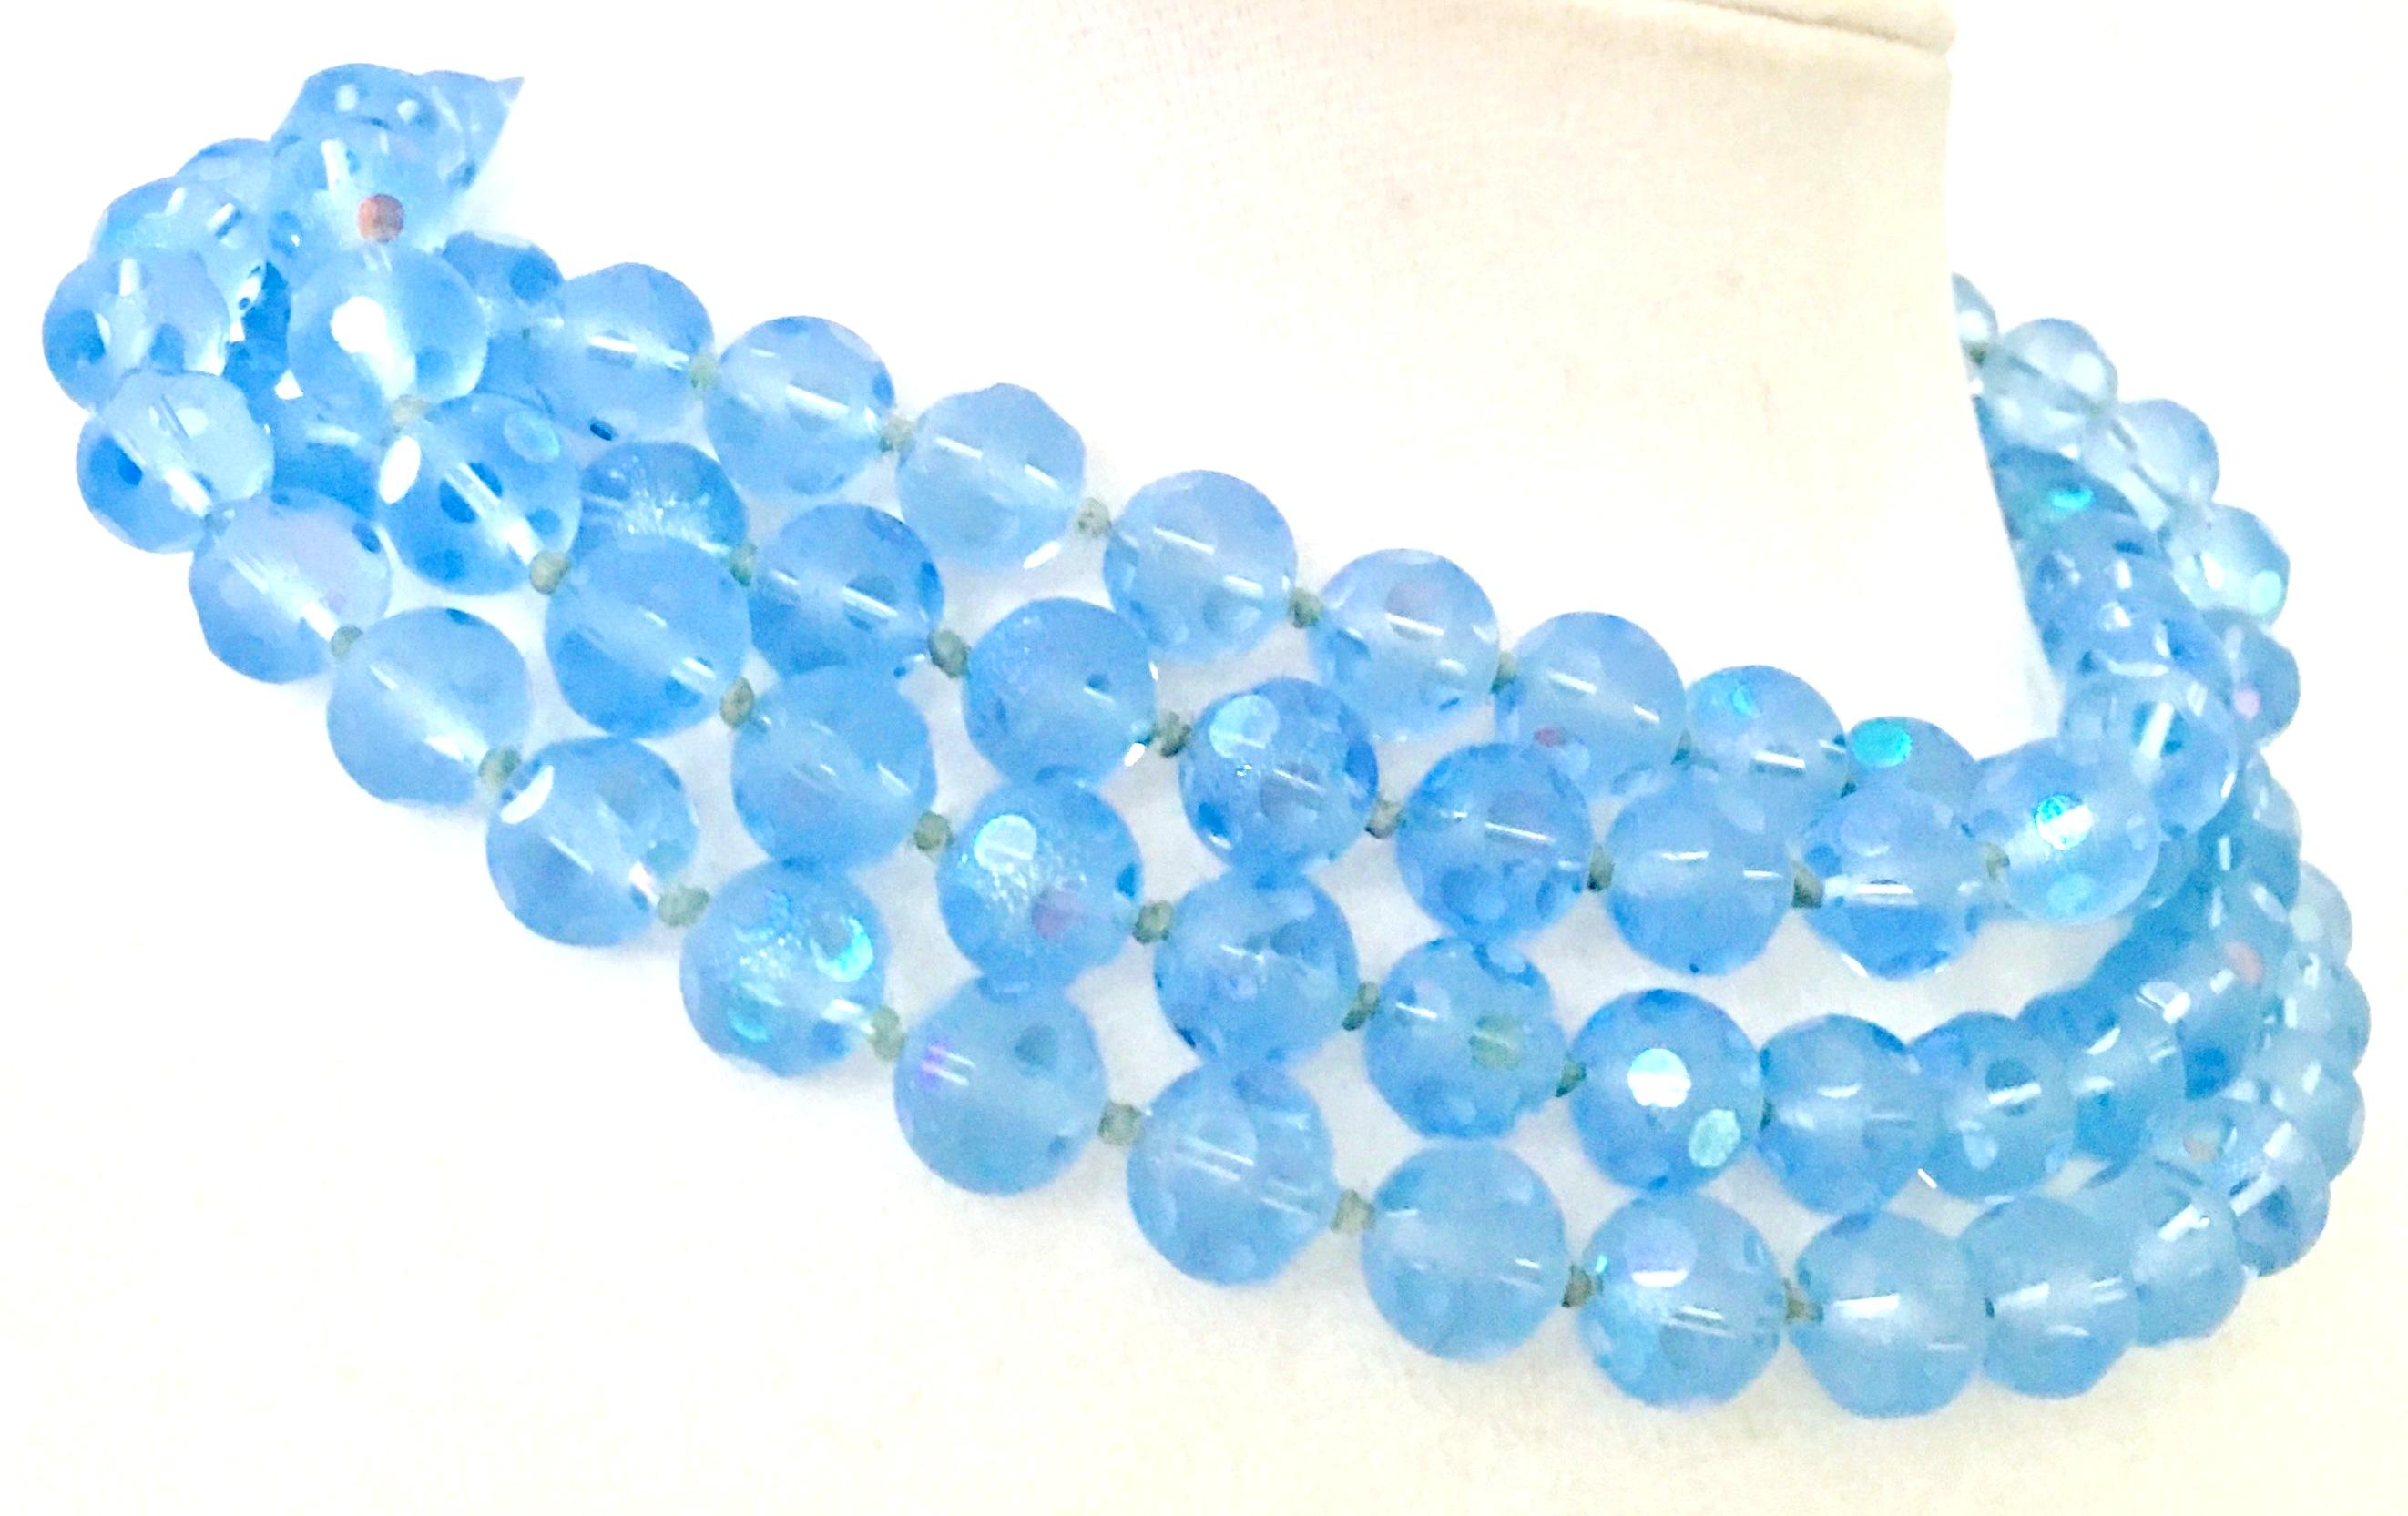 20th Century Cut & Faceted Sky Blue Glass Bead Opera Length Necklace. This classic, timeless, 63